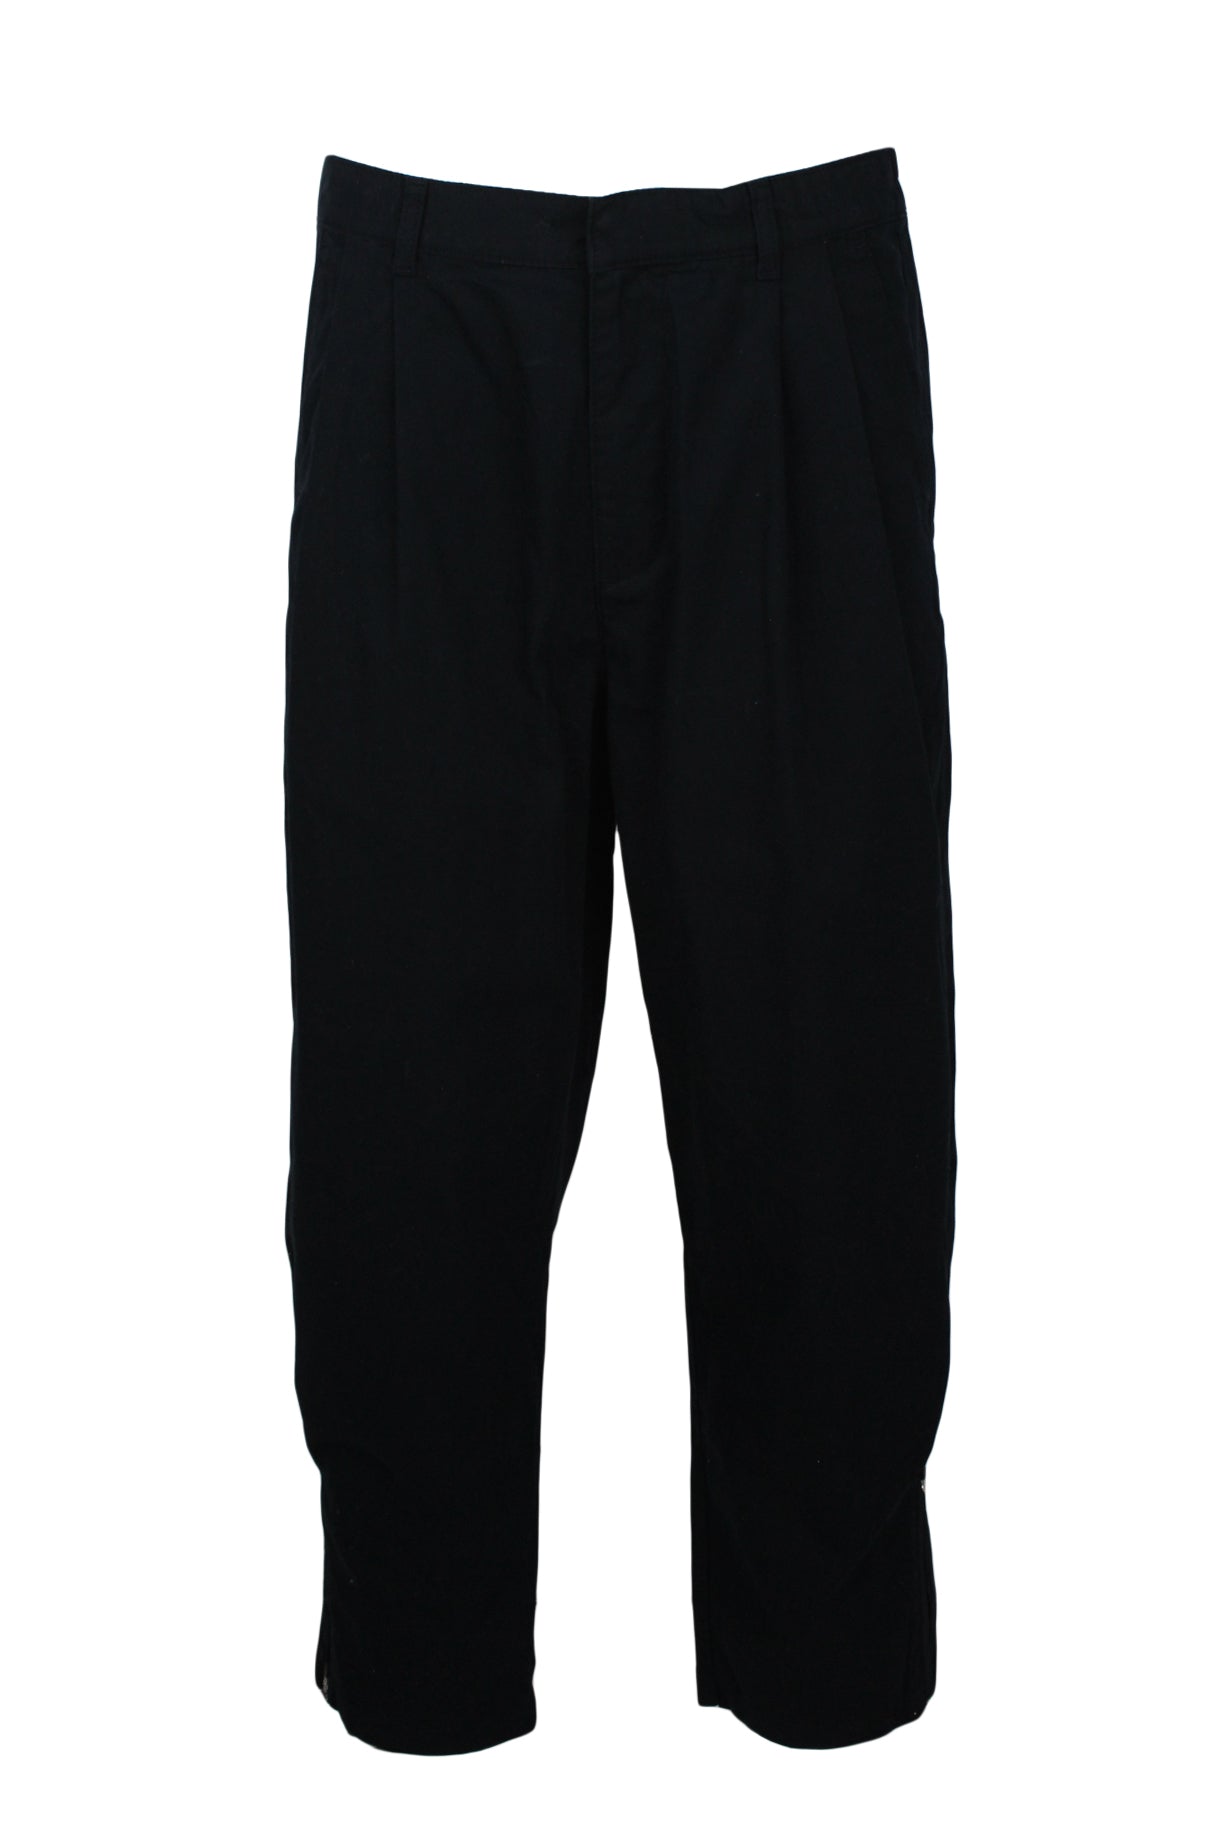 kith black elastic waist pants. features tapered zippered cuffs, elastic waist band, snap/zipper closure, pleated front, and two hip pockets.